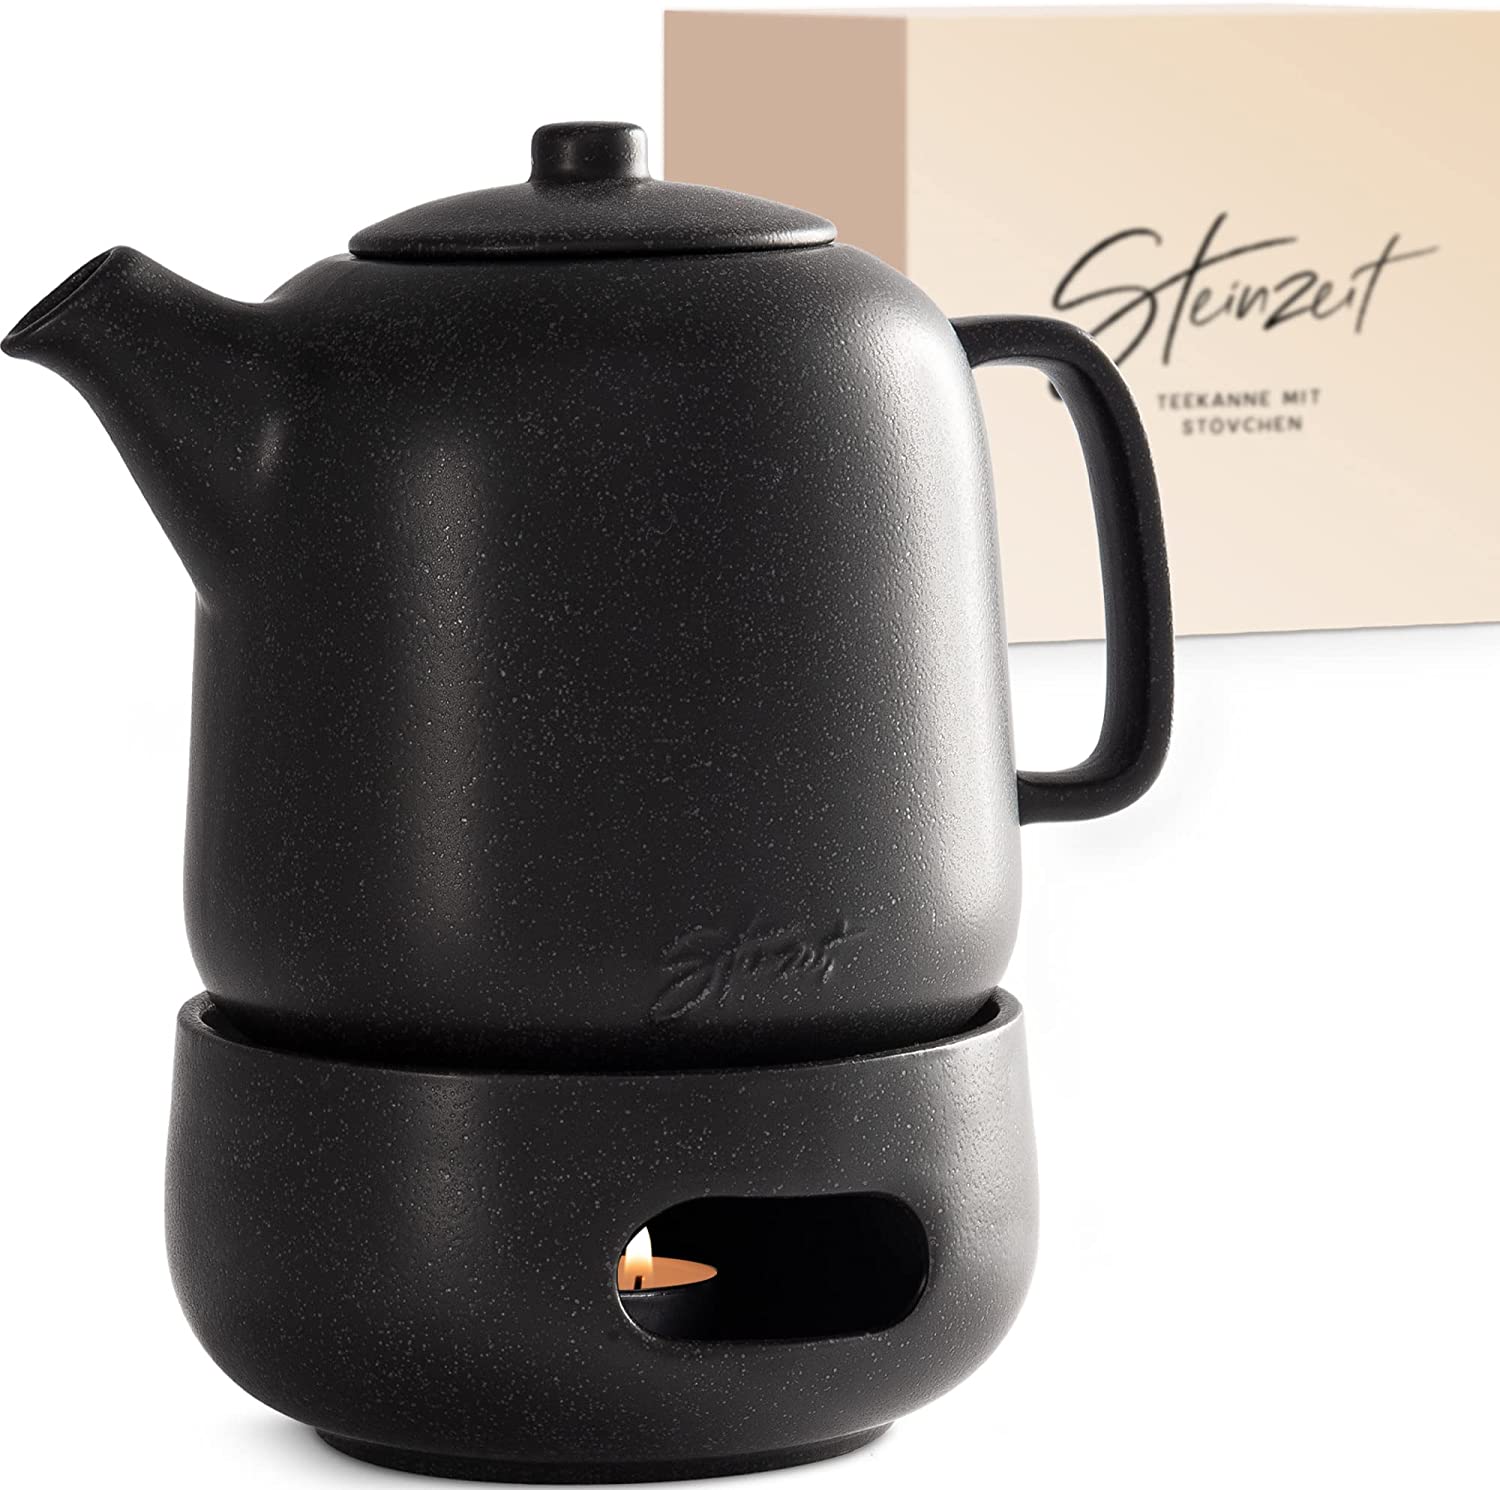 Steinzeit Design Teapot with Warmer (1.3 L) - Teapot with Strainer Insert Made of 304 Stainless Steel - Ceramic Teapot with Unique Glaze - Removable Teapot with Strainer - Black